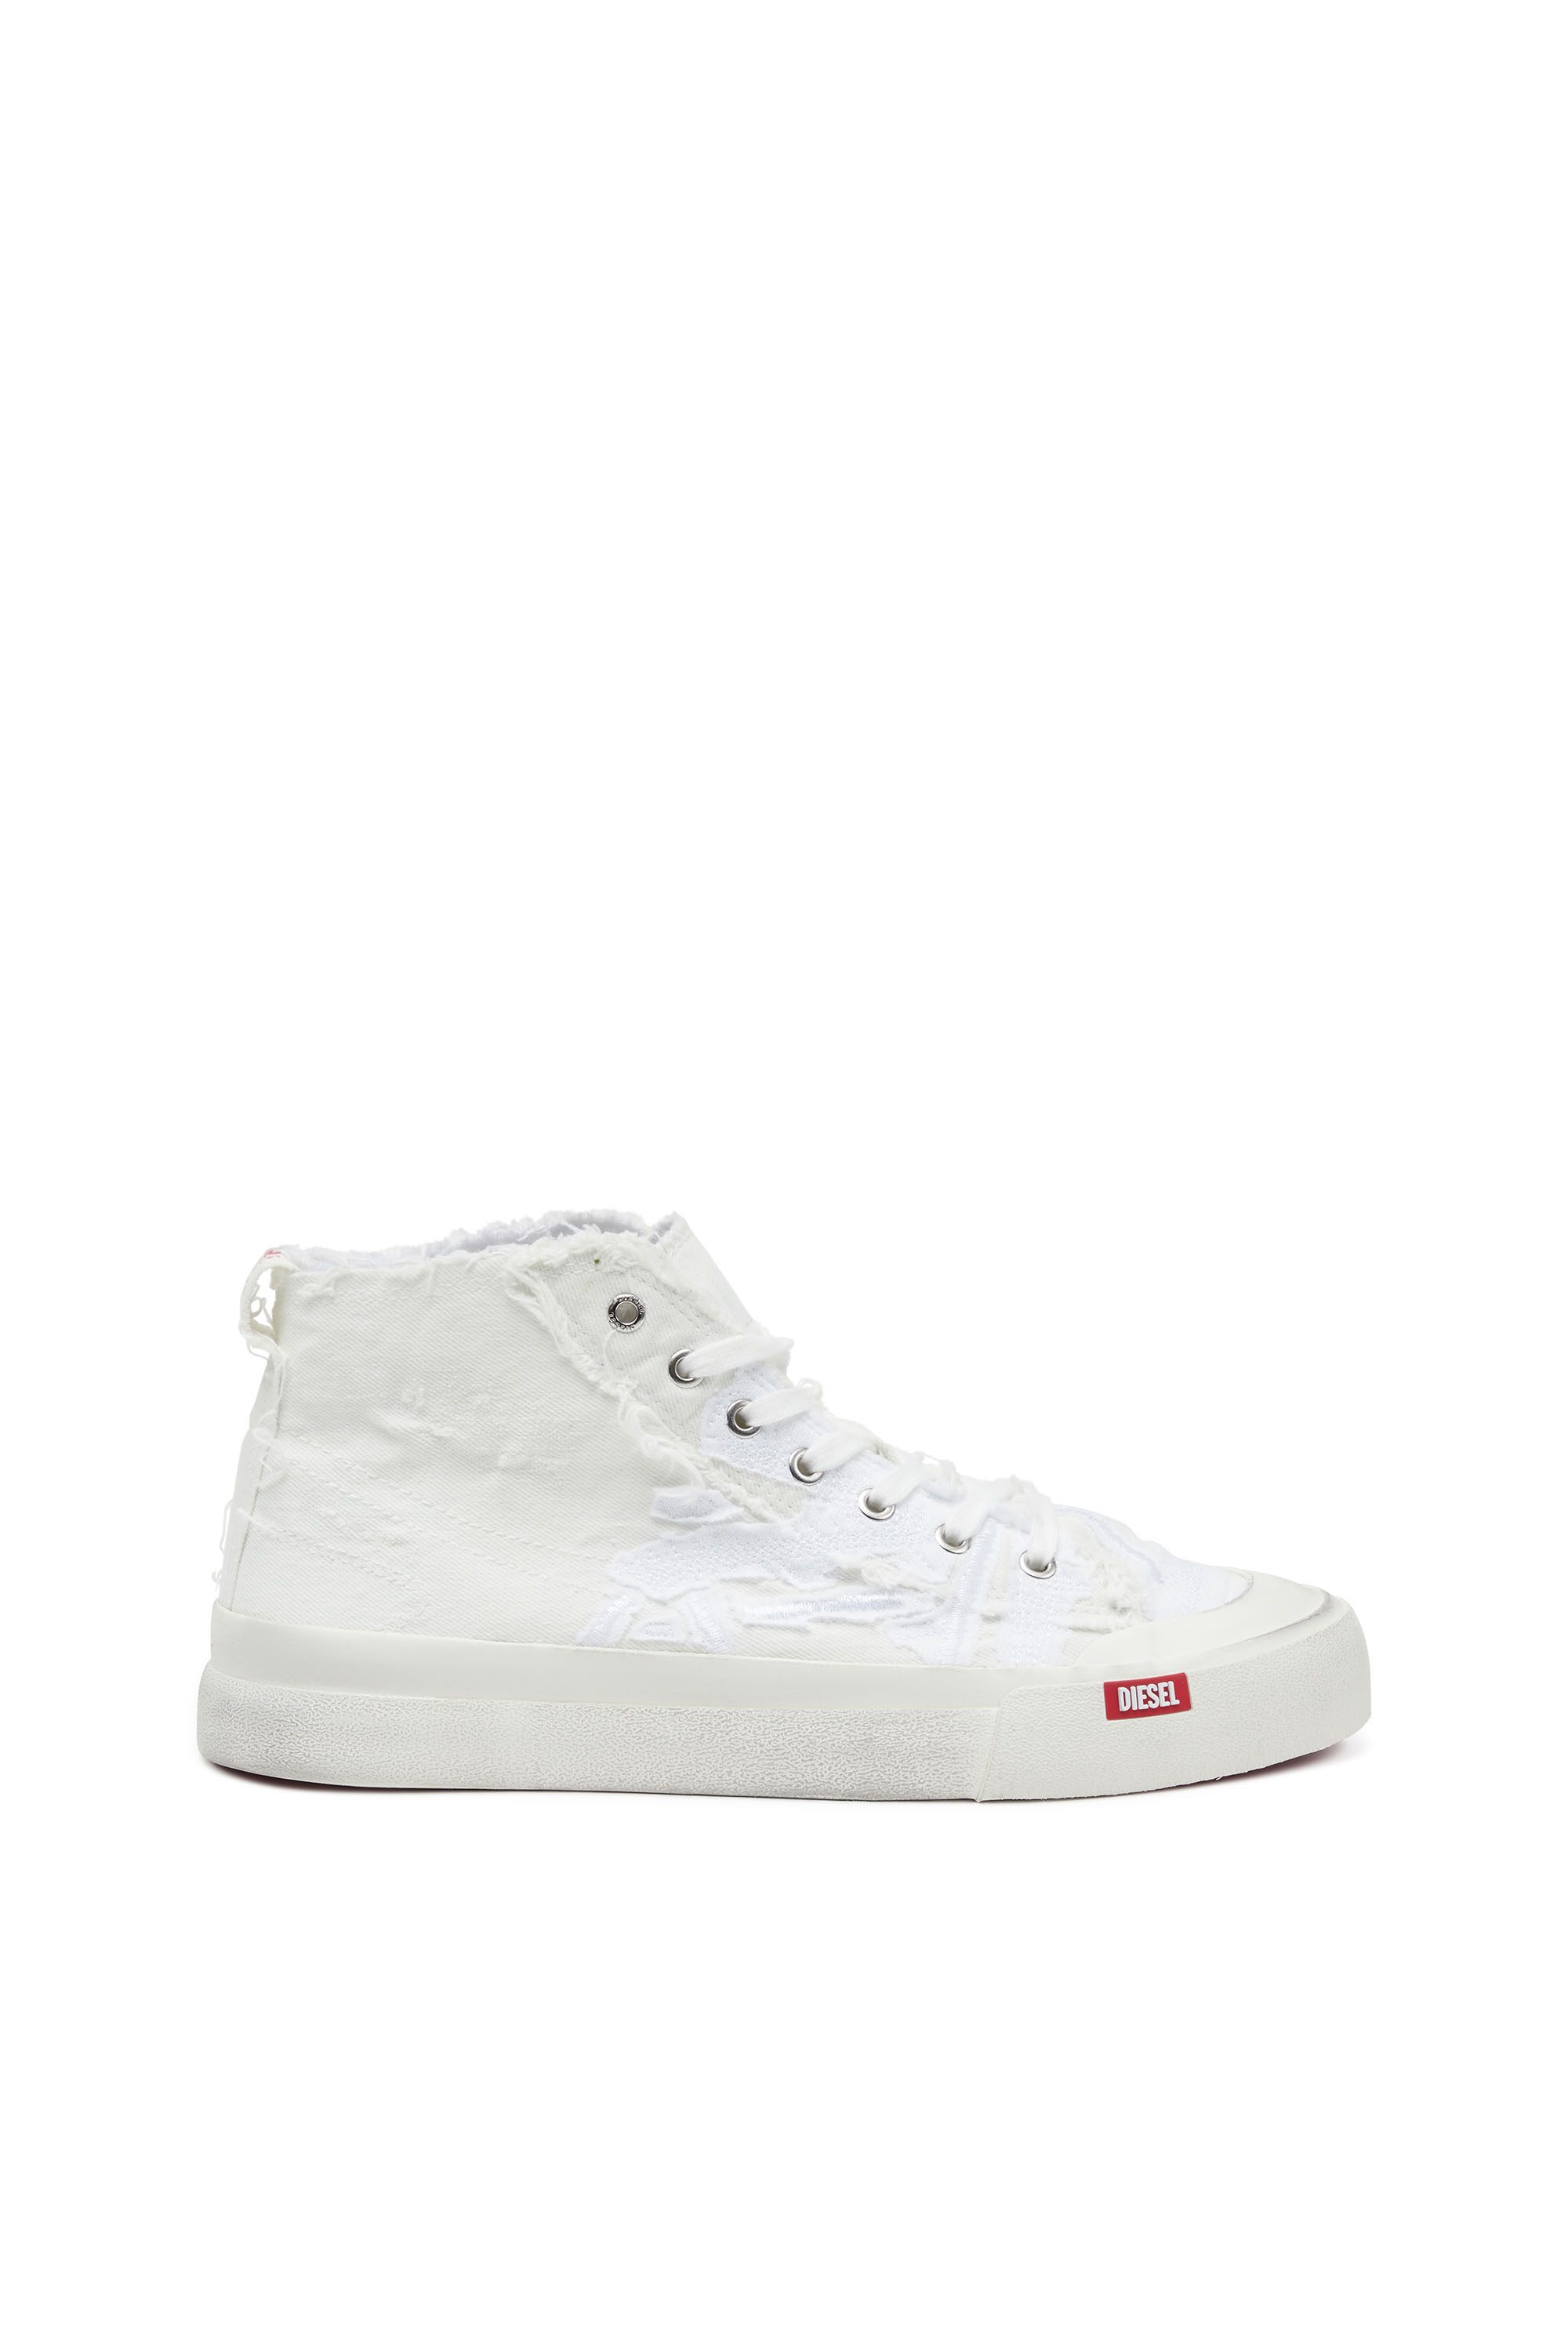 Diesel - S-ATHOS MID, Man S-Athos Mid-Destroyed gauze and denim high-top sneakers in White - Image 1